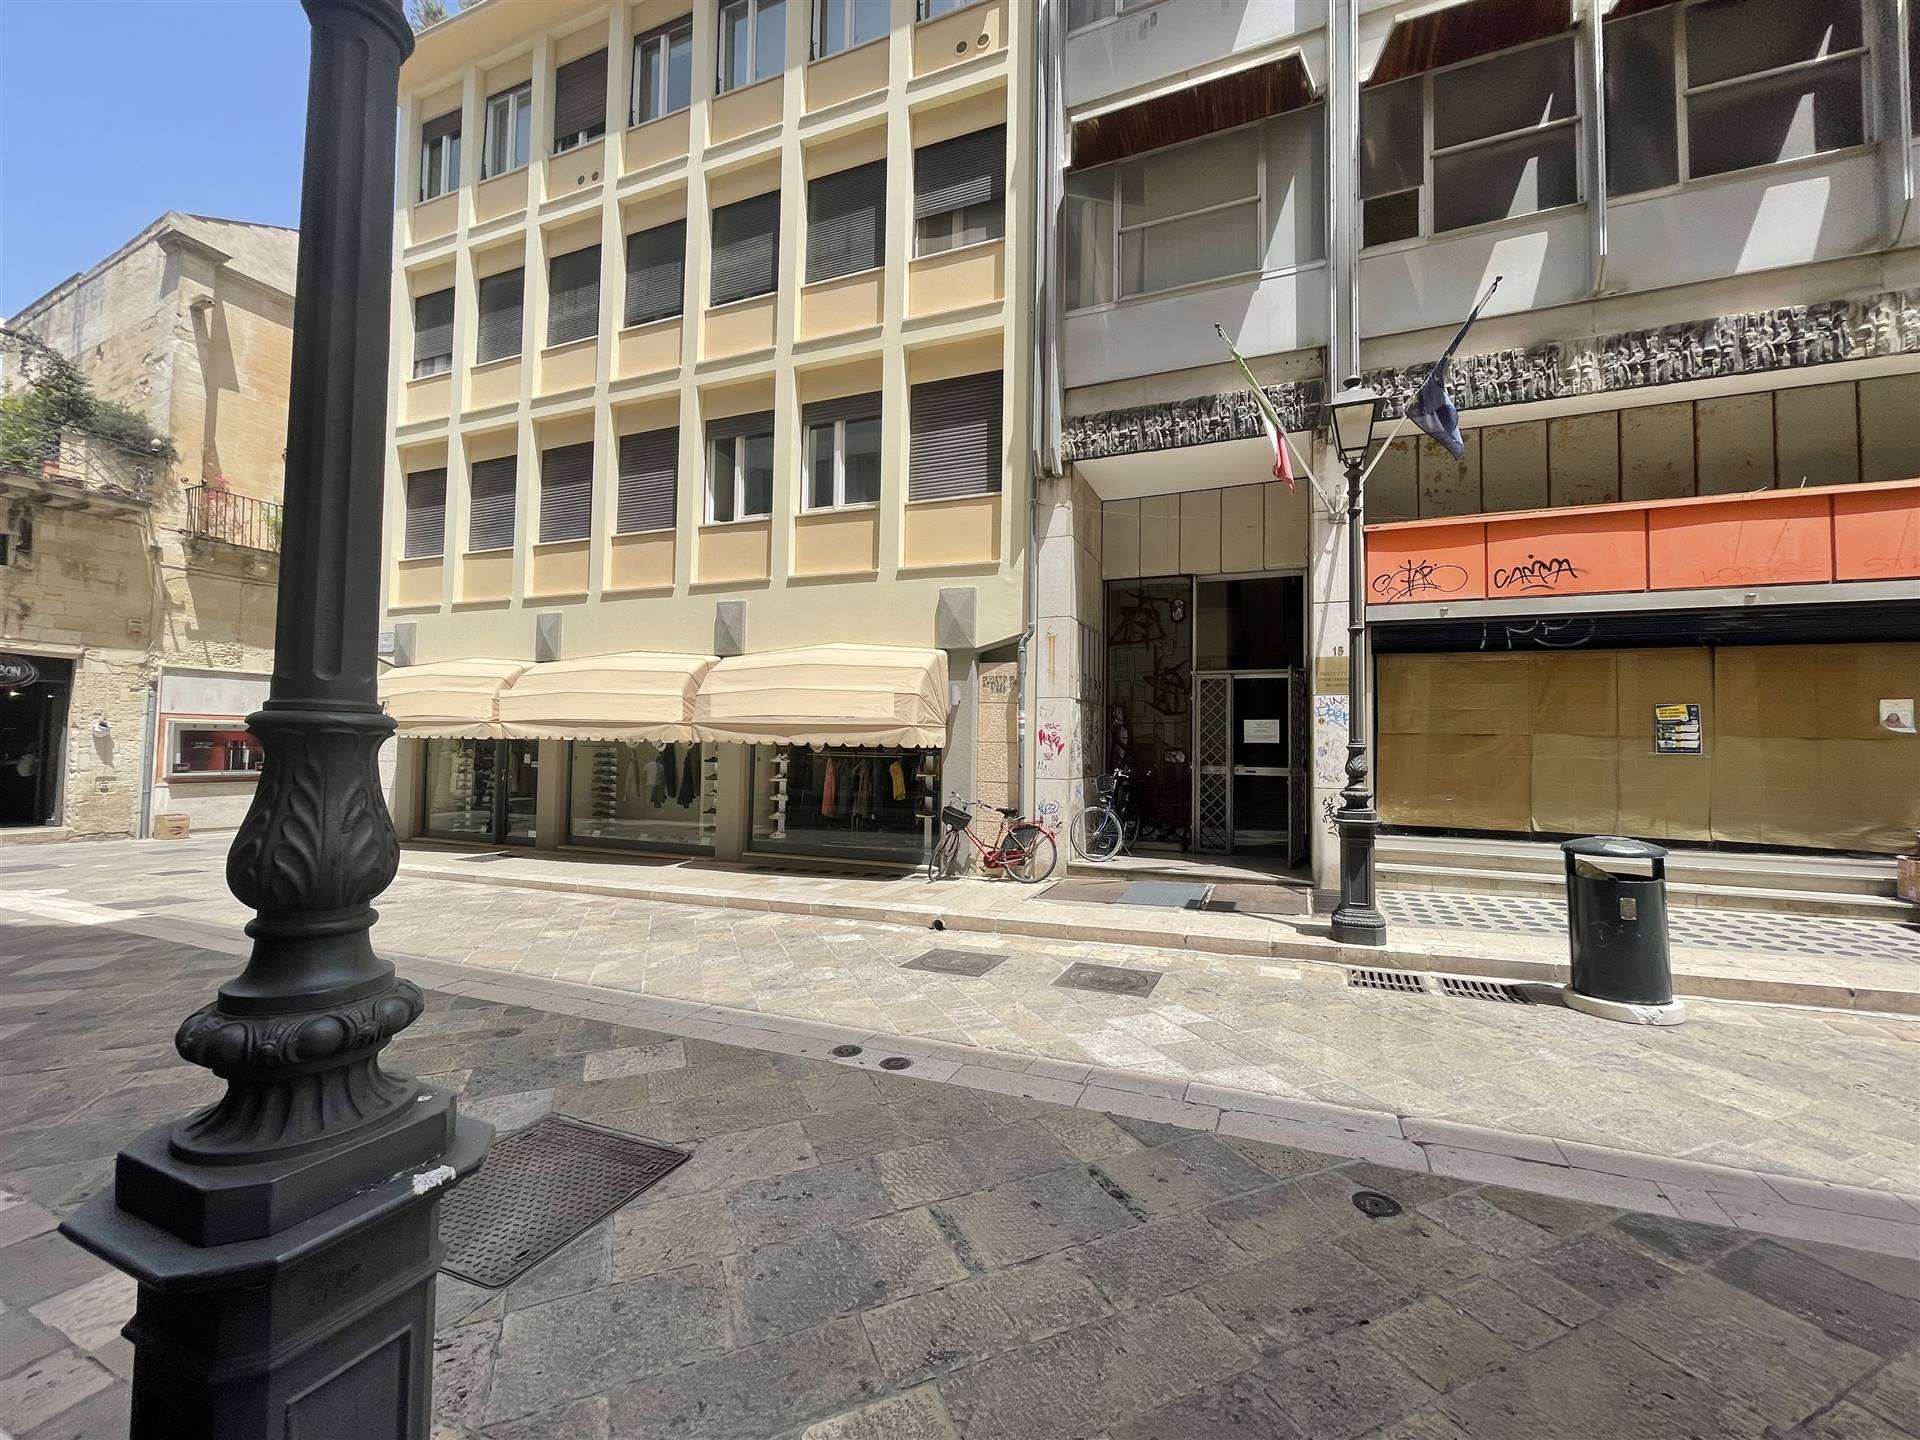 CENTRO STORICO, LECCE, Office for sale of 2525 Sq. mt., Heating Individual heating system, Energetic class: E, Epi: 10 kwh/m3 year, composed by: 75 